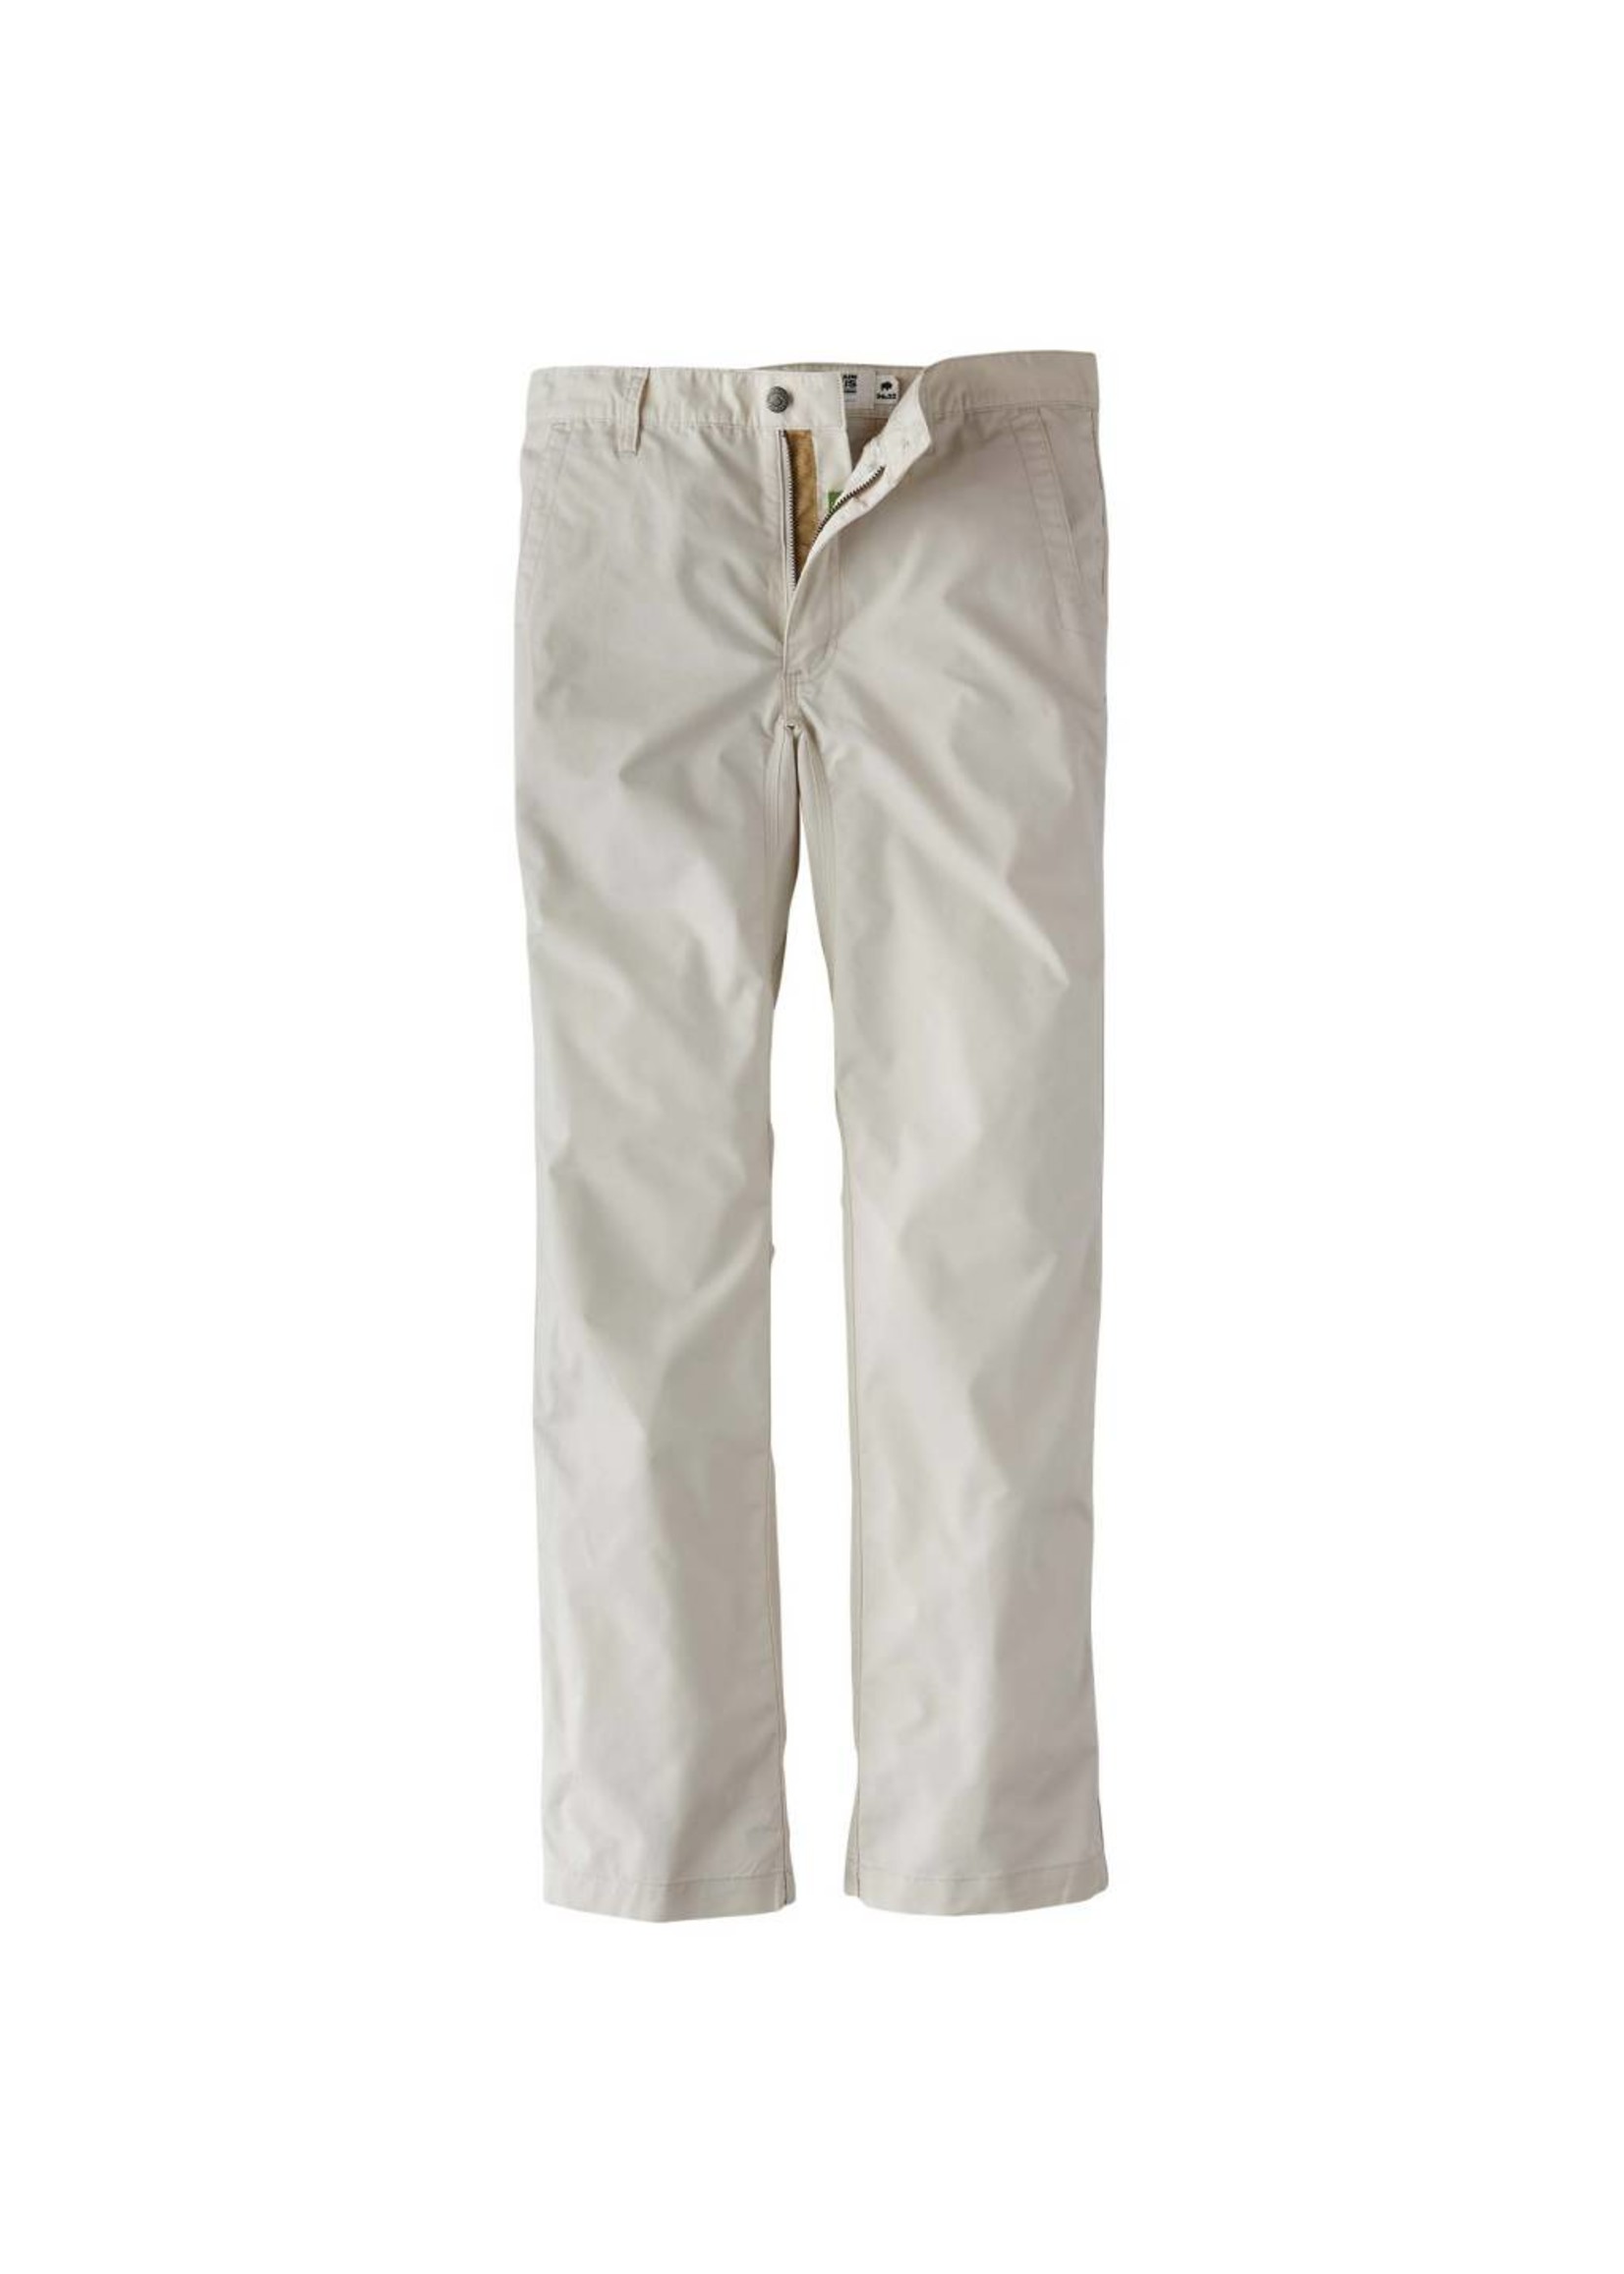 Mountain Khakis Stretch Poplin Pant Relaxed Fit